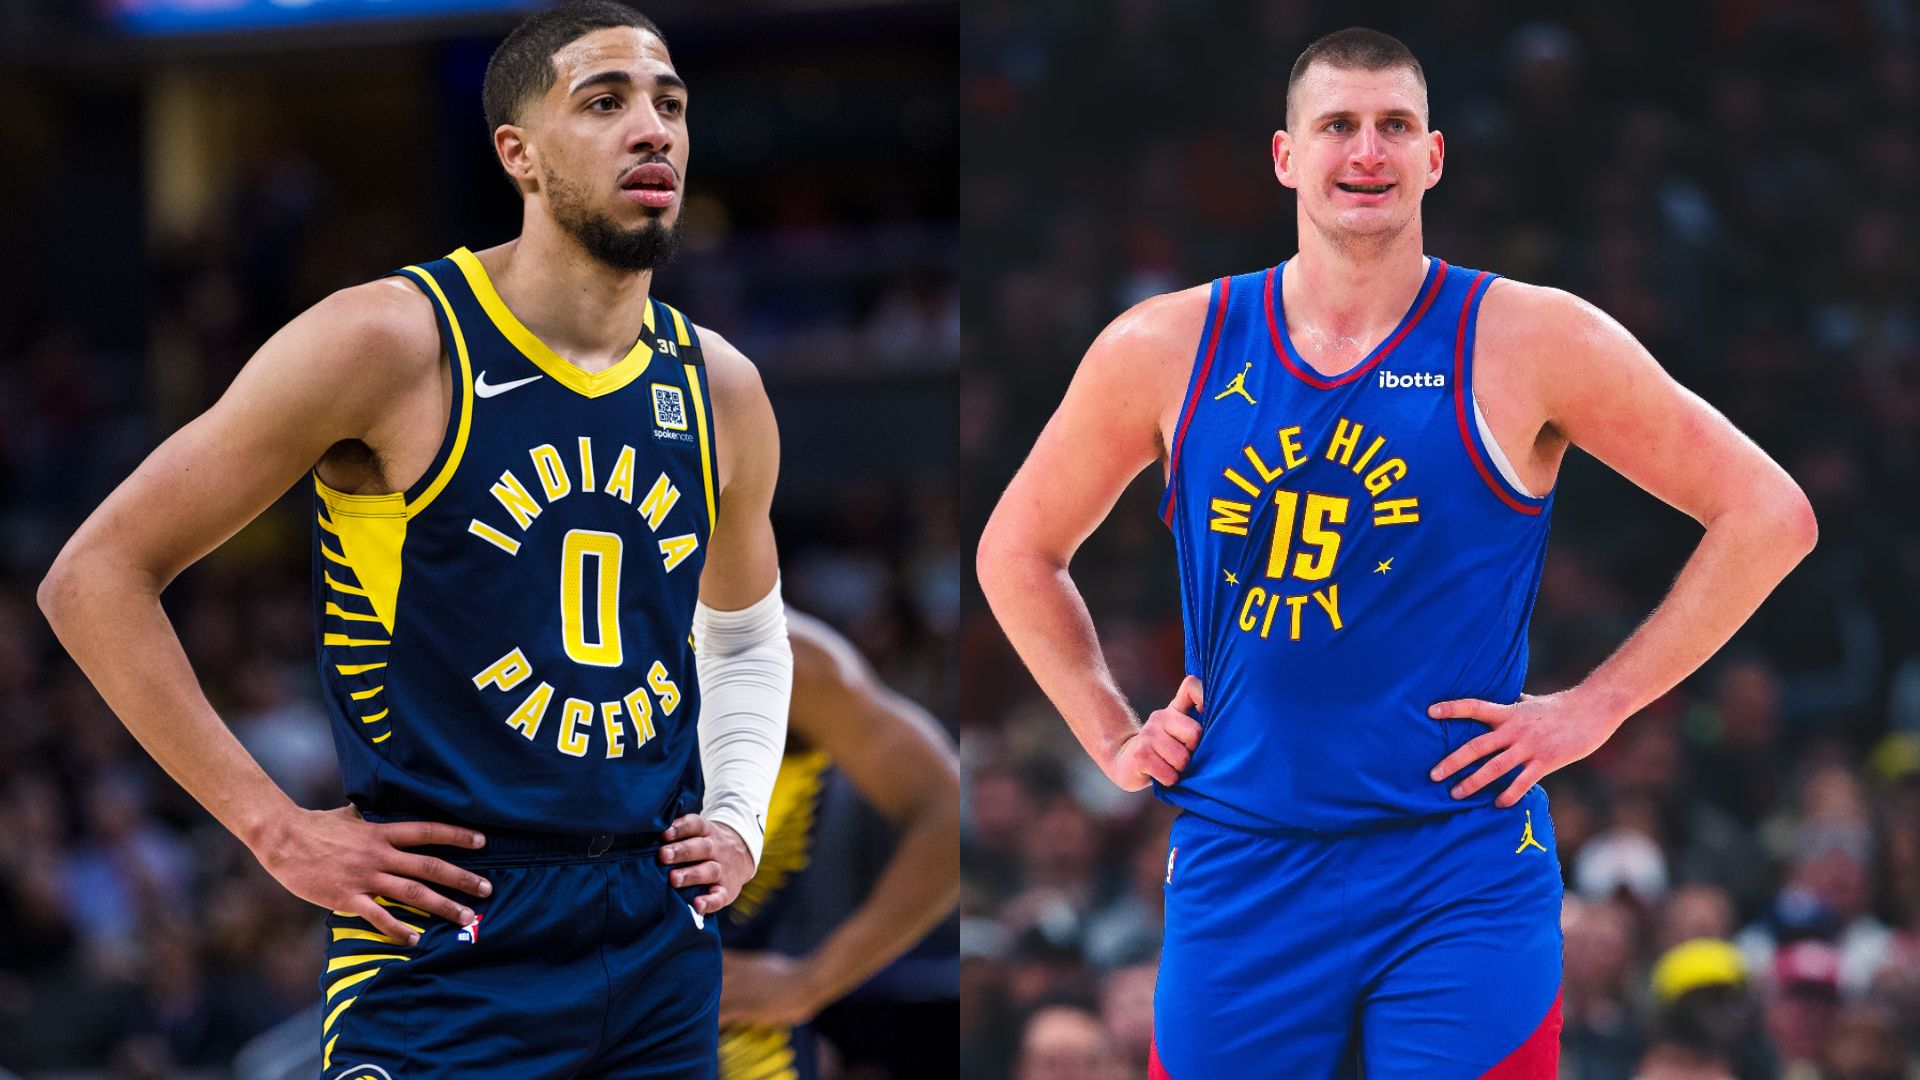 Indiana Pacers vs Denver Nuggets NBA Live Stream, Schedule, Fixture